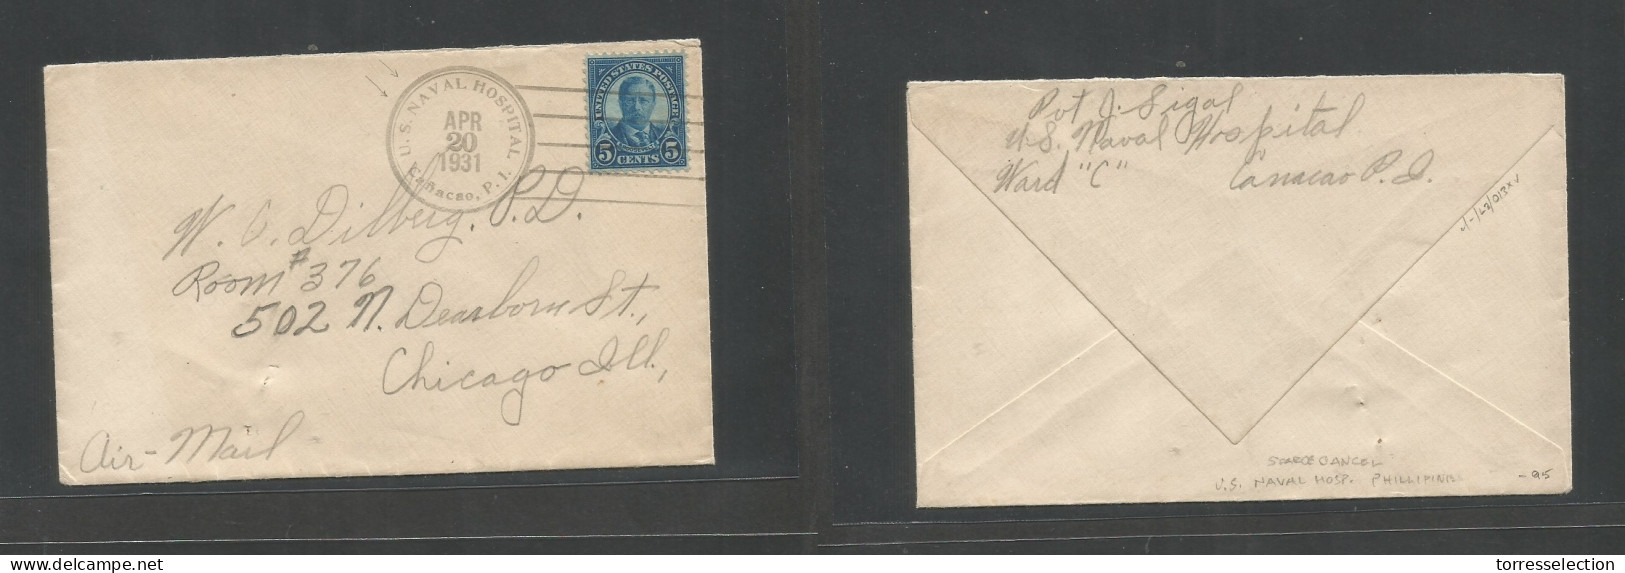 PHILIPPINES. 1931 (20 Apr) US Naval Hospital, Cañacao - USA, Chicago, Ill. Fkd Env 5c Blue, Tied Cds Grill. Airmail Endo - Filippine